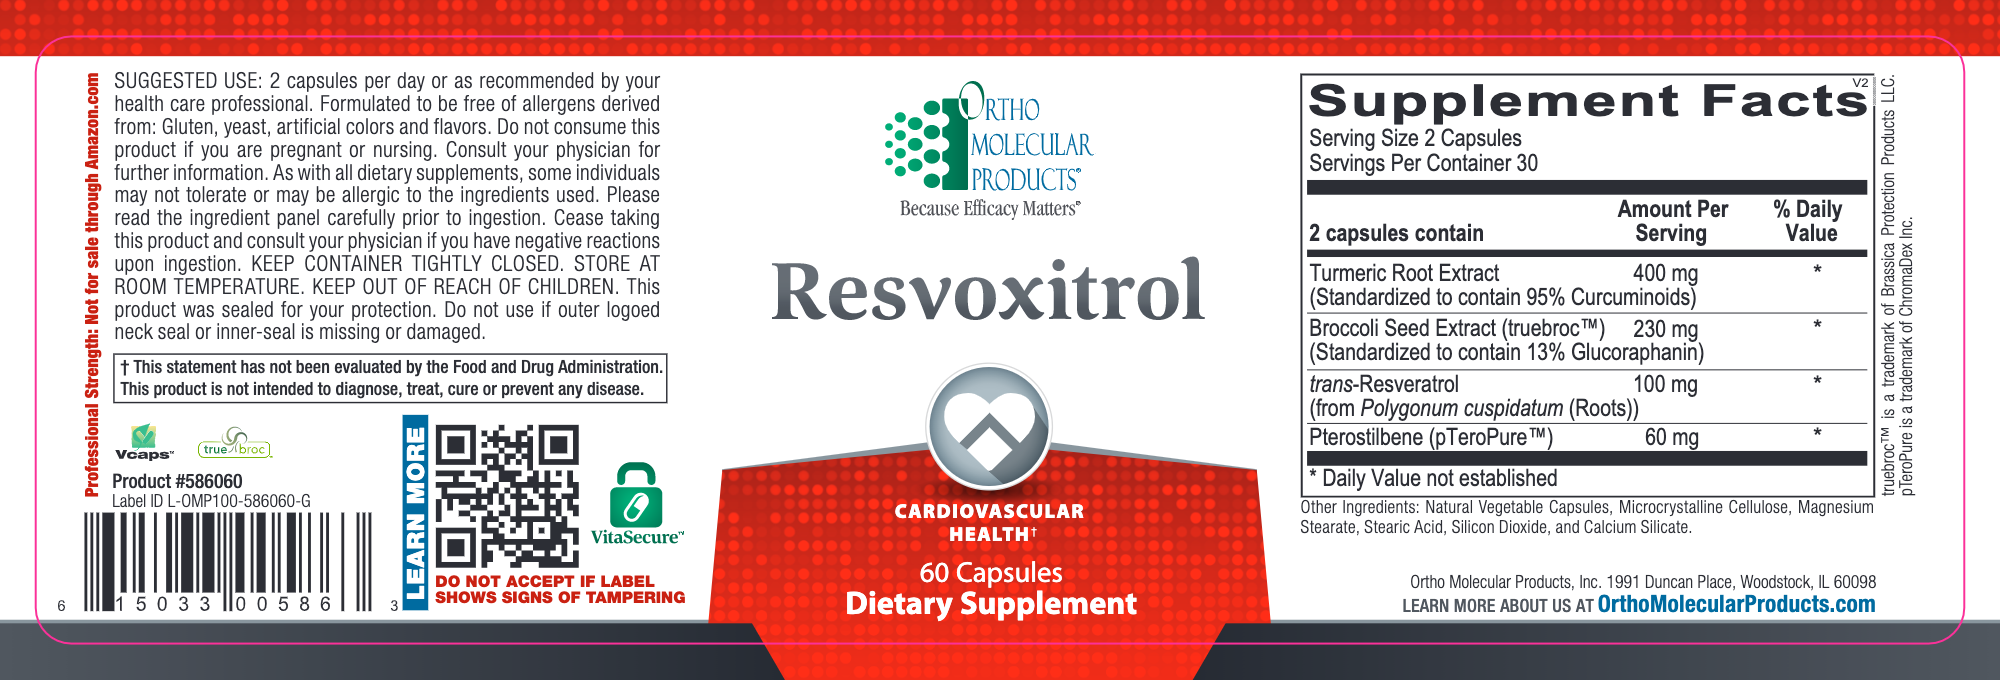 Resvoxitrol (60 Capsules)-Vitamins & Supplements-Ortho Molecular Products-Pine Street Clinic